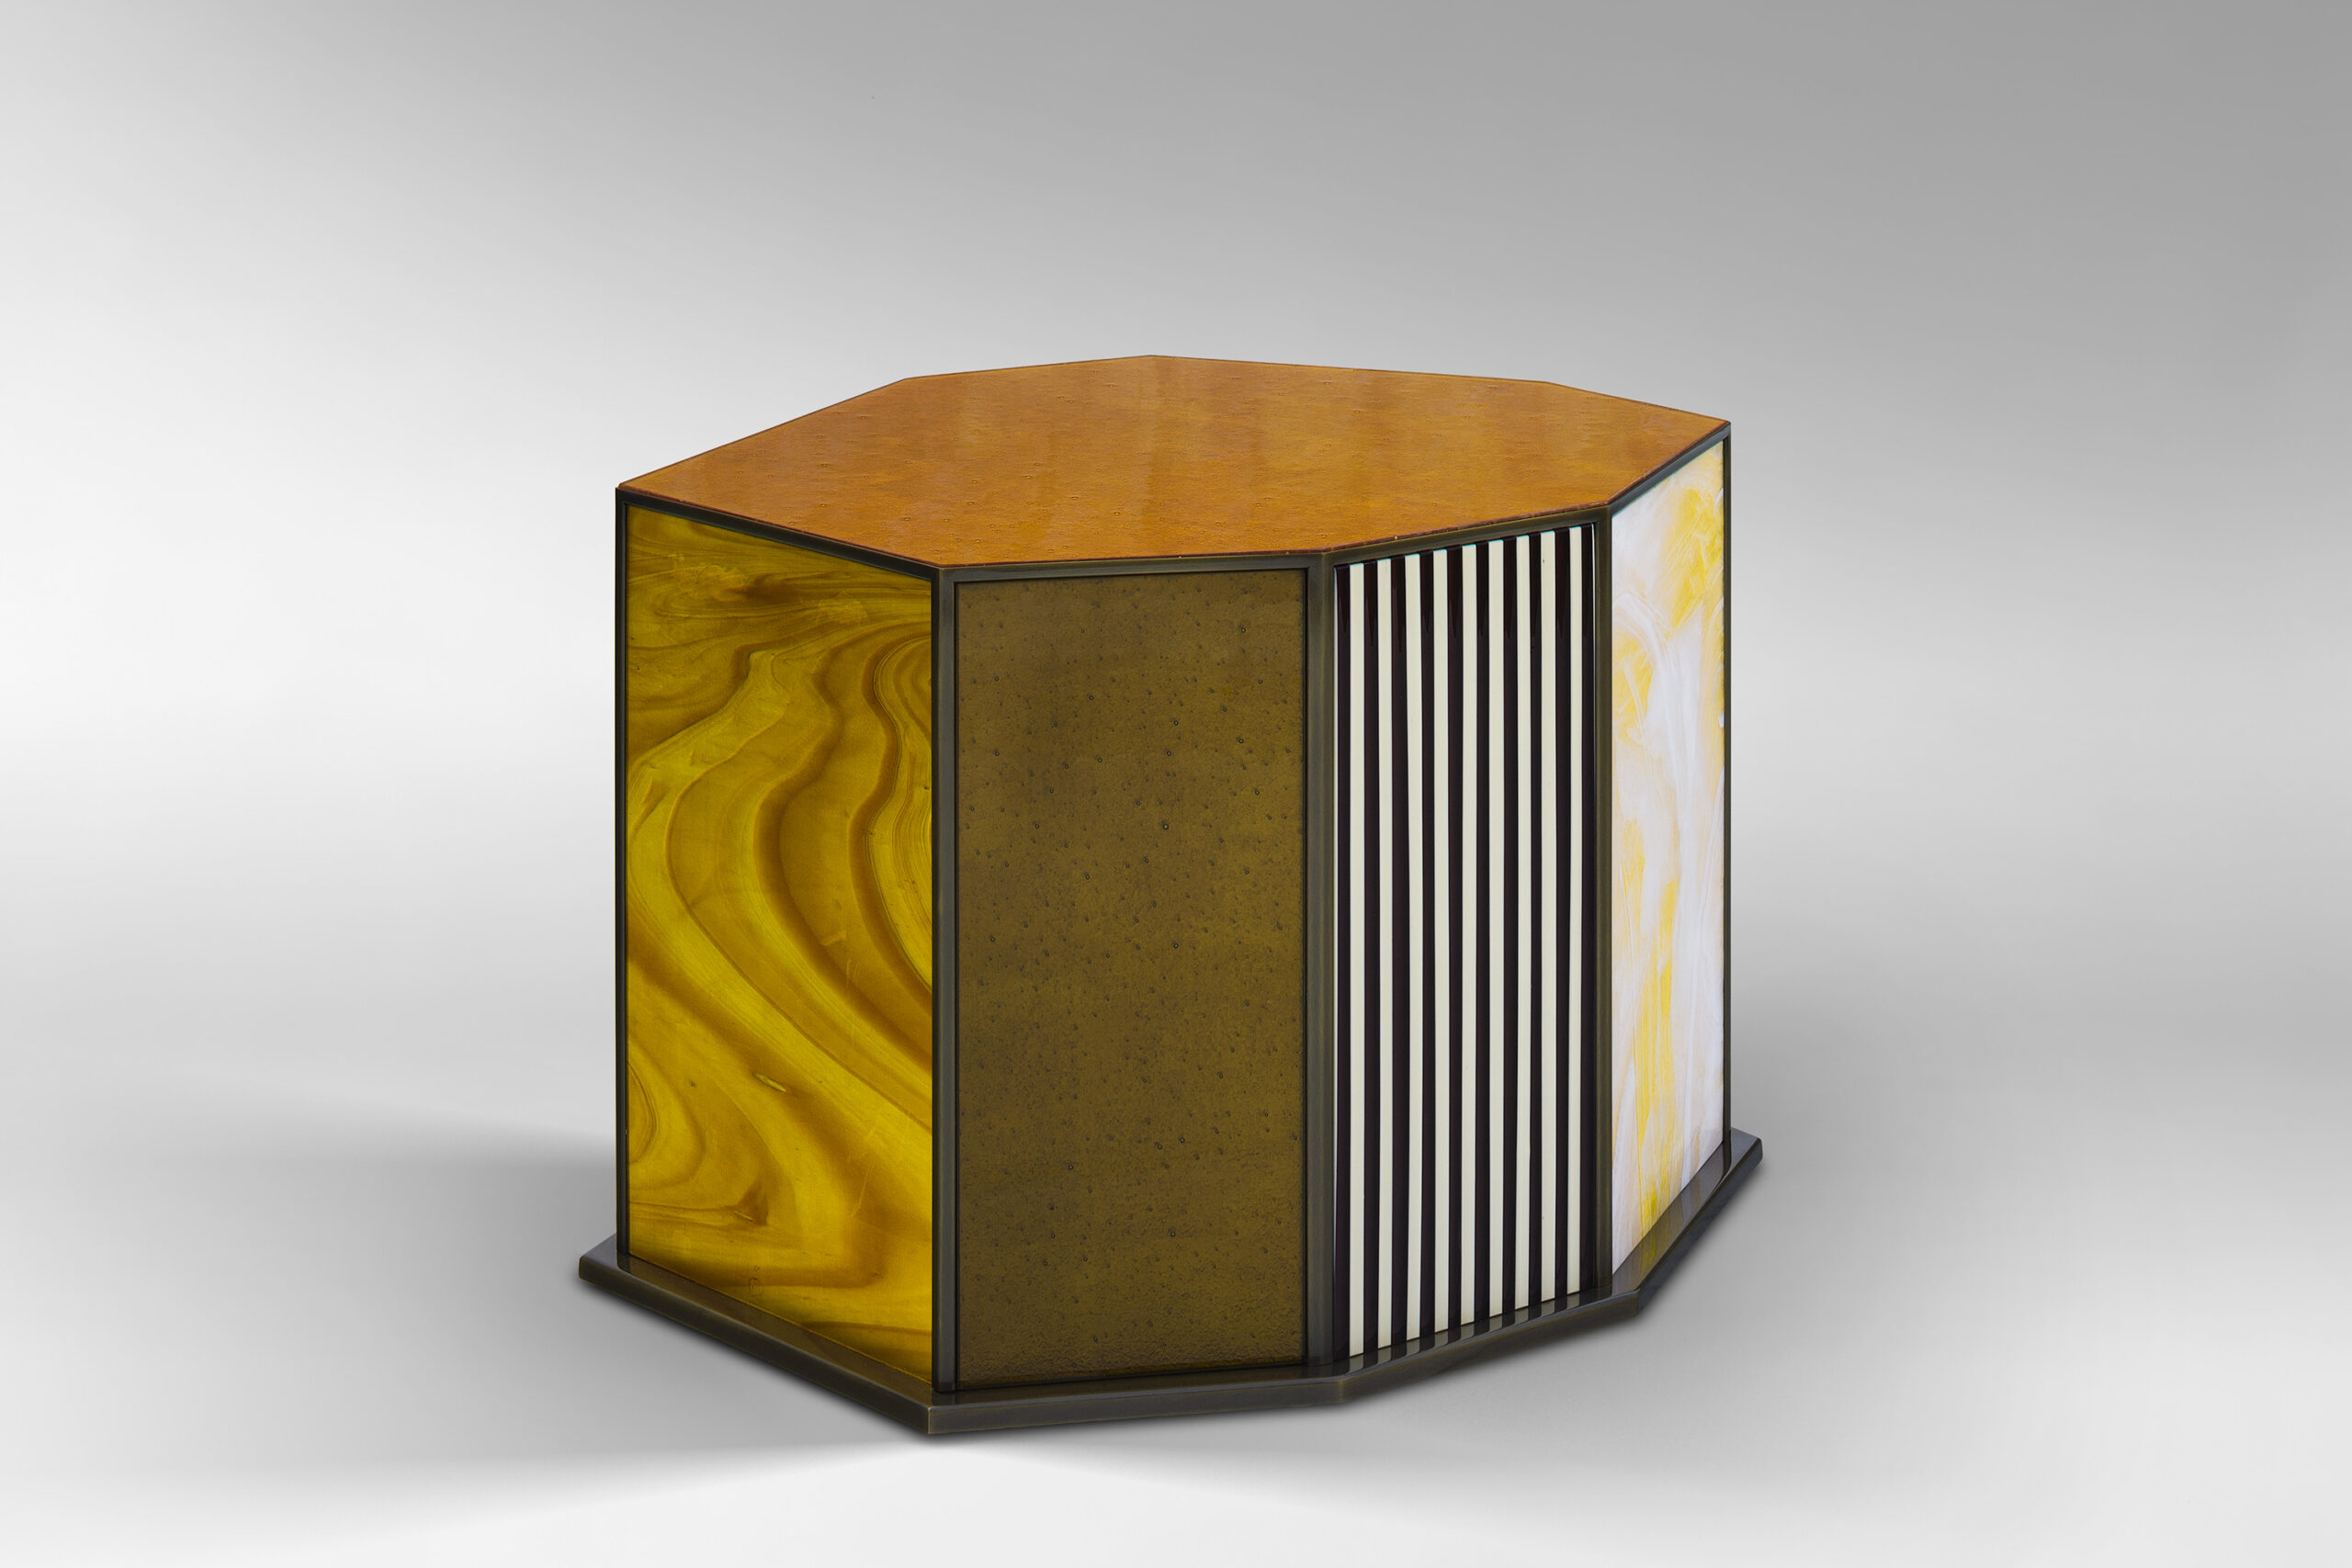 Gold Cube table